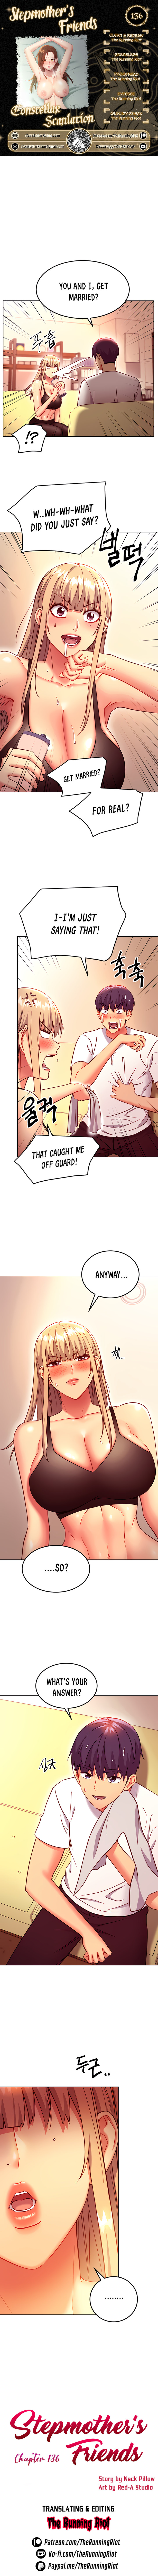 Panel Image 1 for chapter 136 of manhwa Stepmother